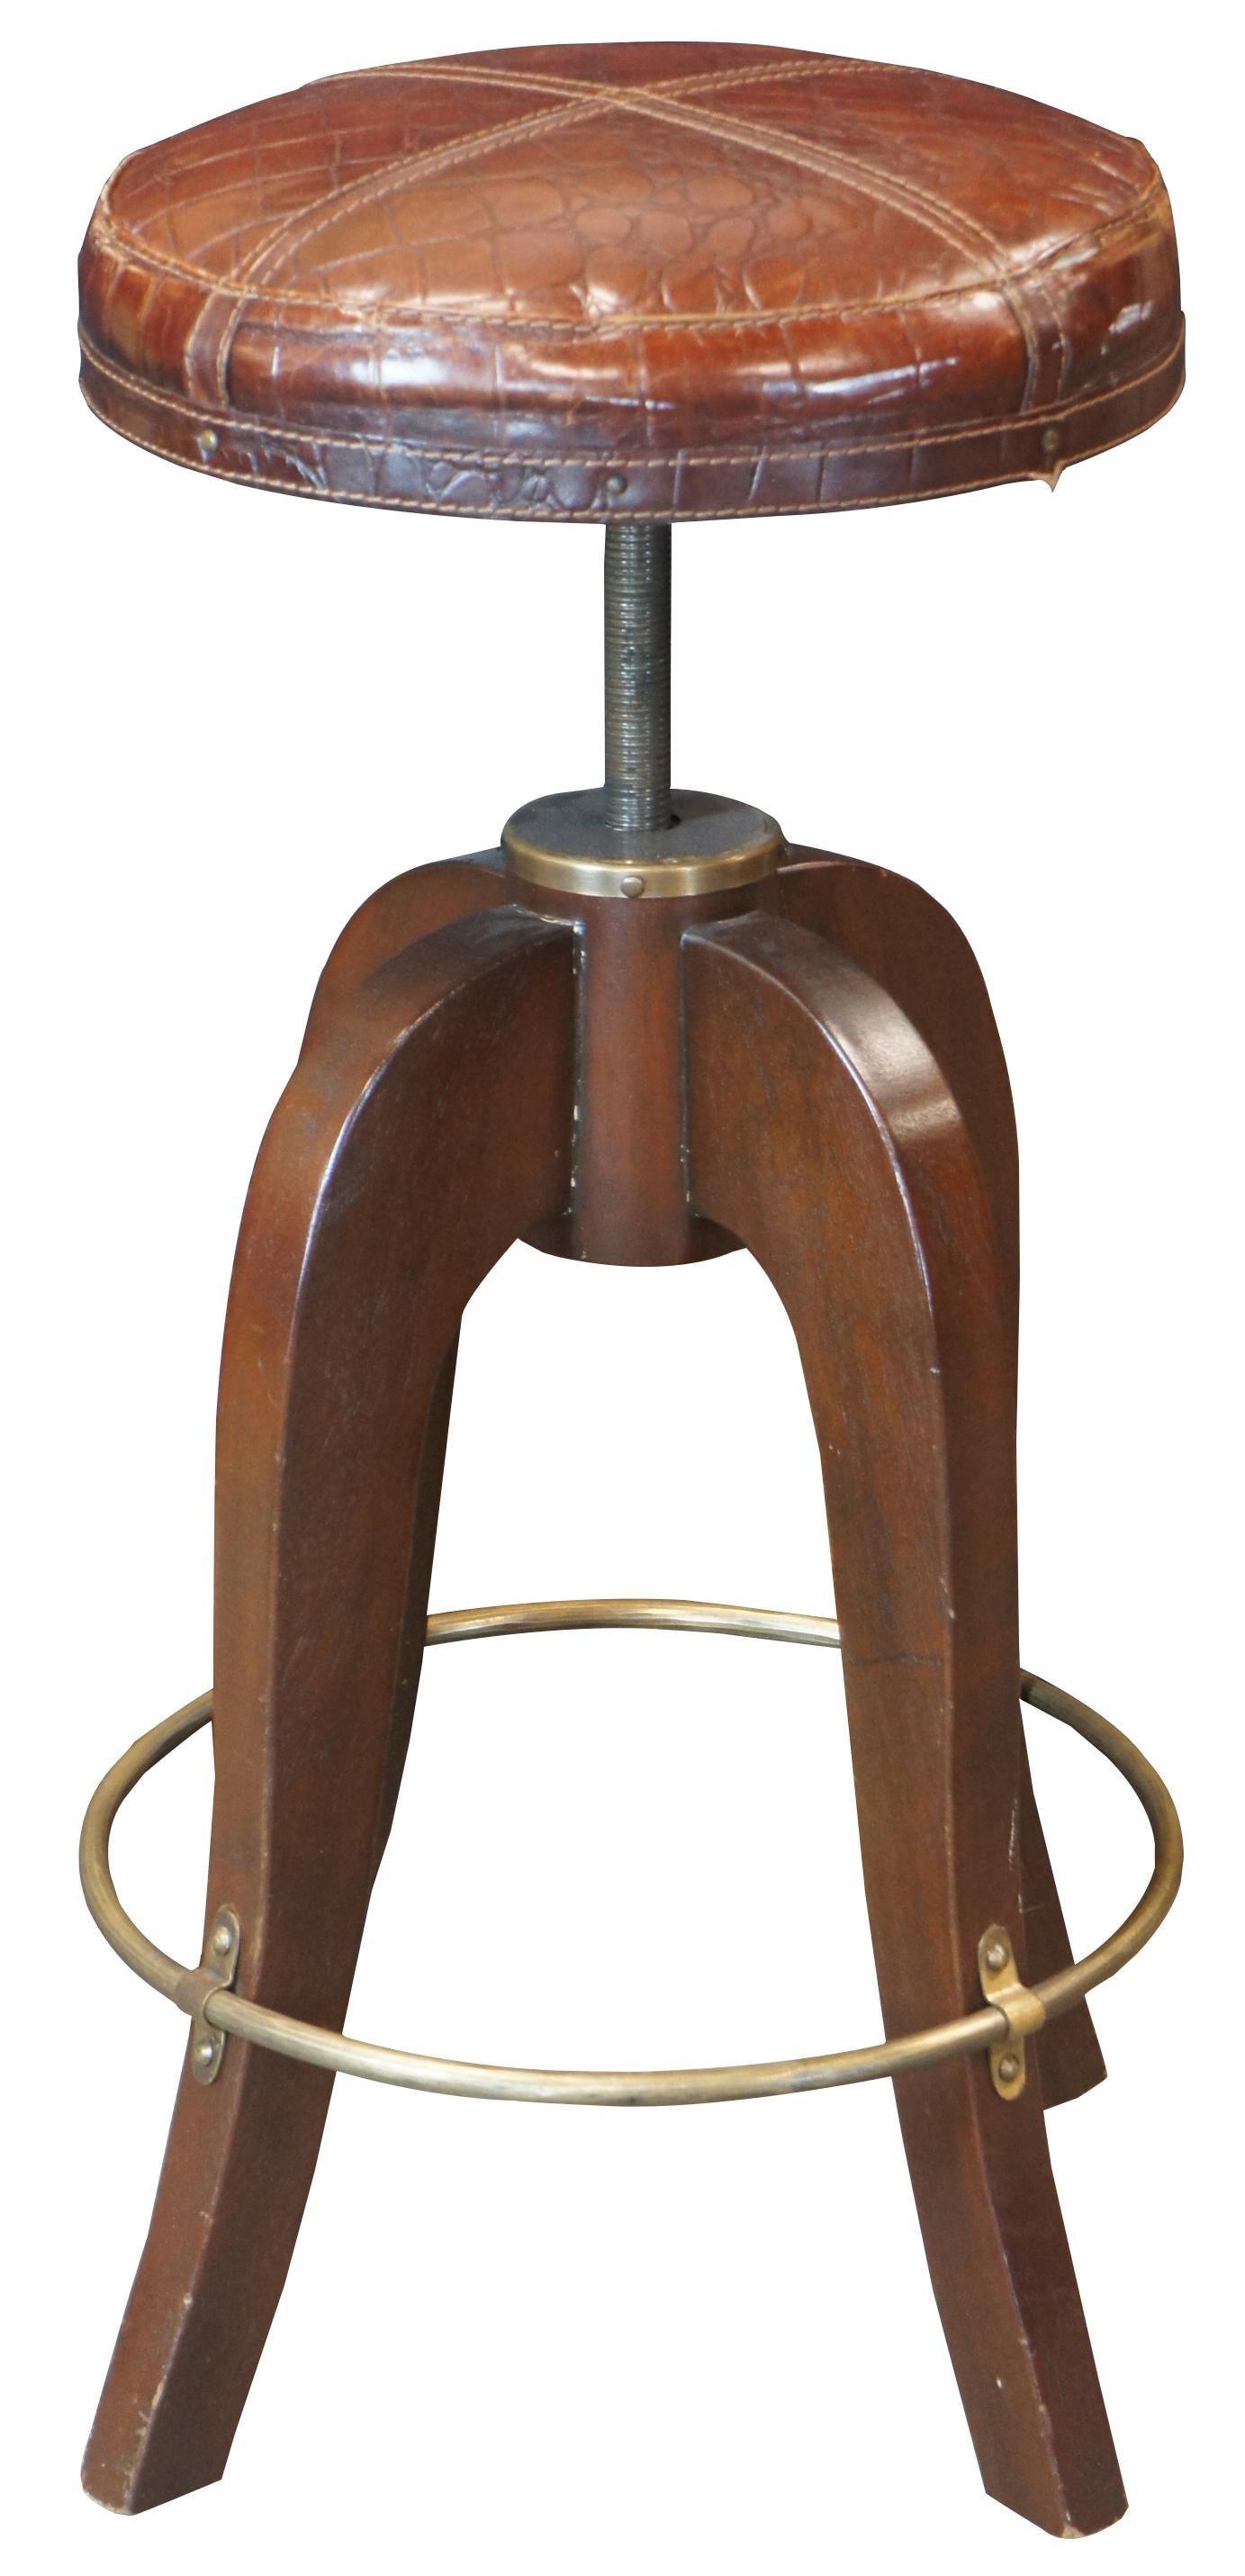 Vintage Bauer International Stiles Brothers collection campaign barstool. Made of mahogany and brass with crocodile embossed leather seat.

About Stiles Brothers Collection - A Spirit of Travel and Adventure
Evoke a spirit of adventure to the far